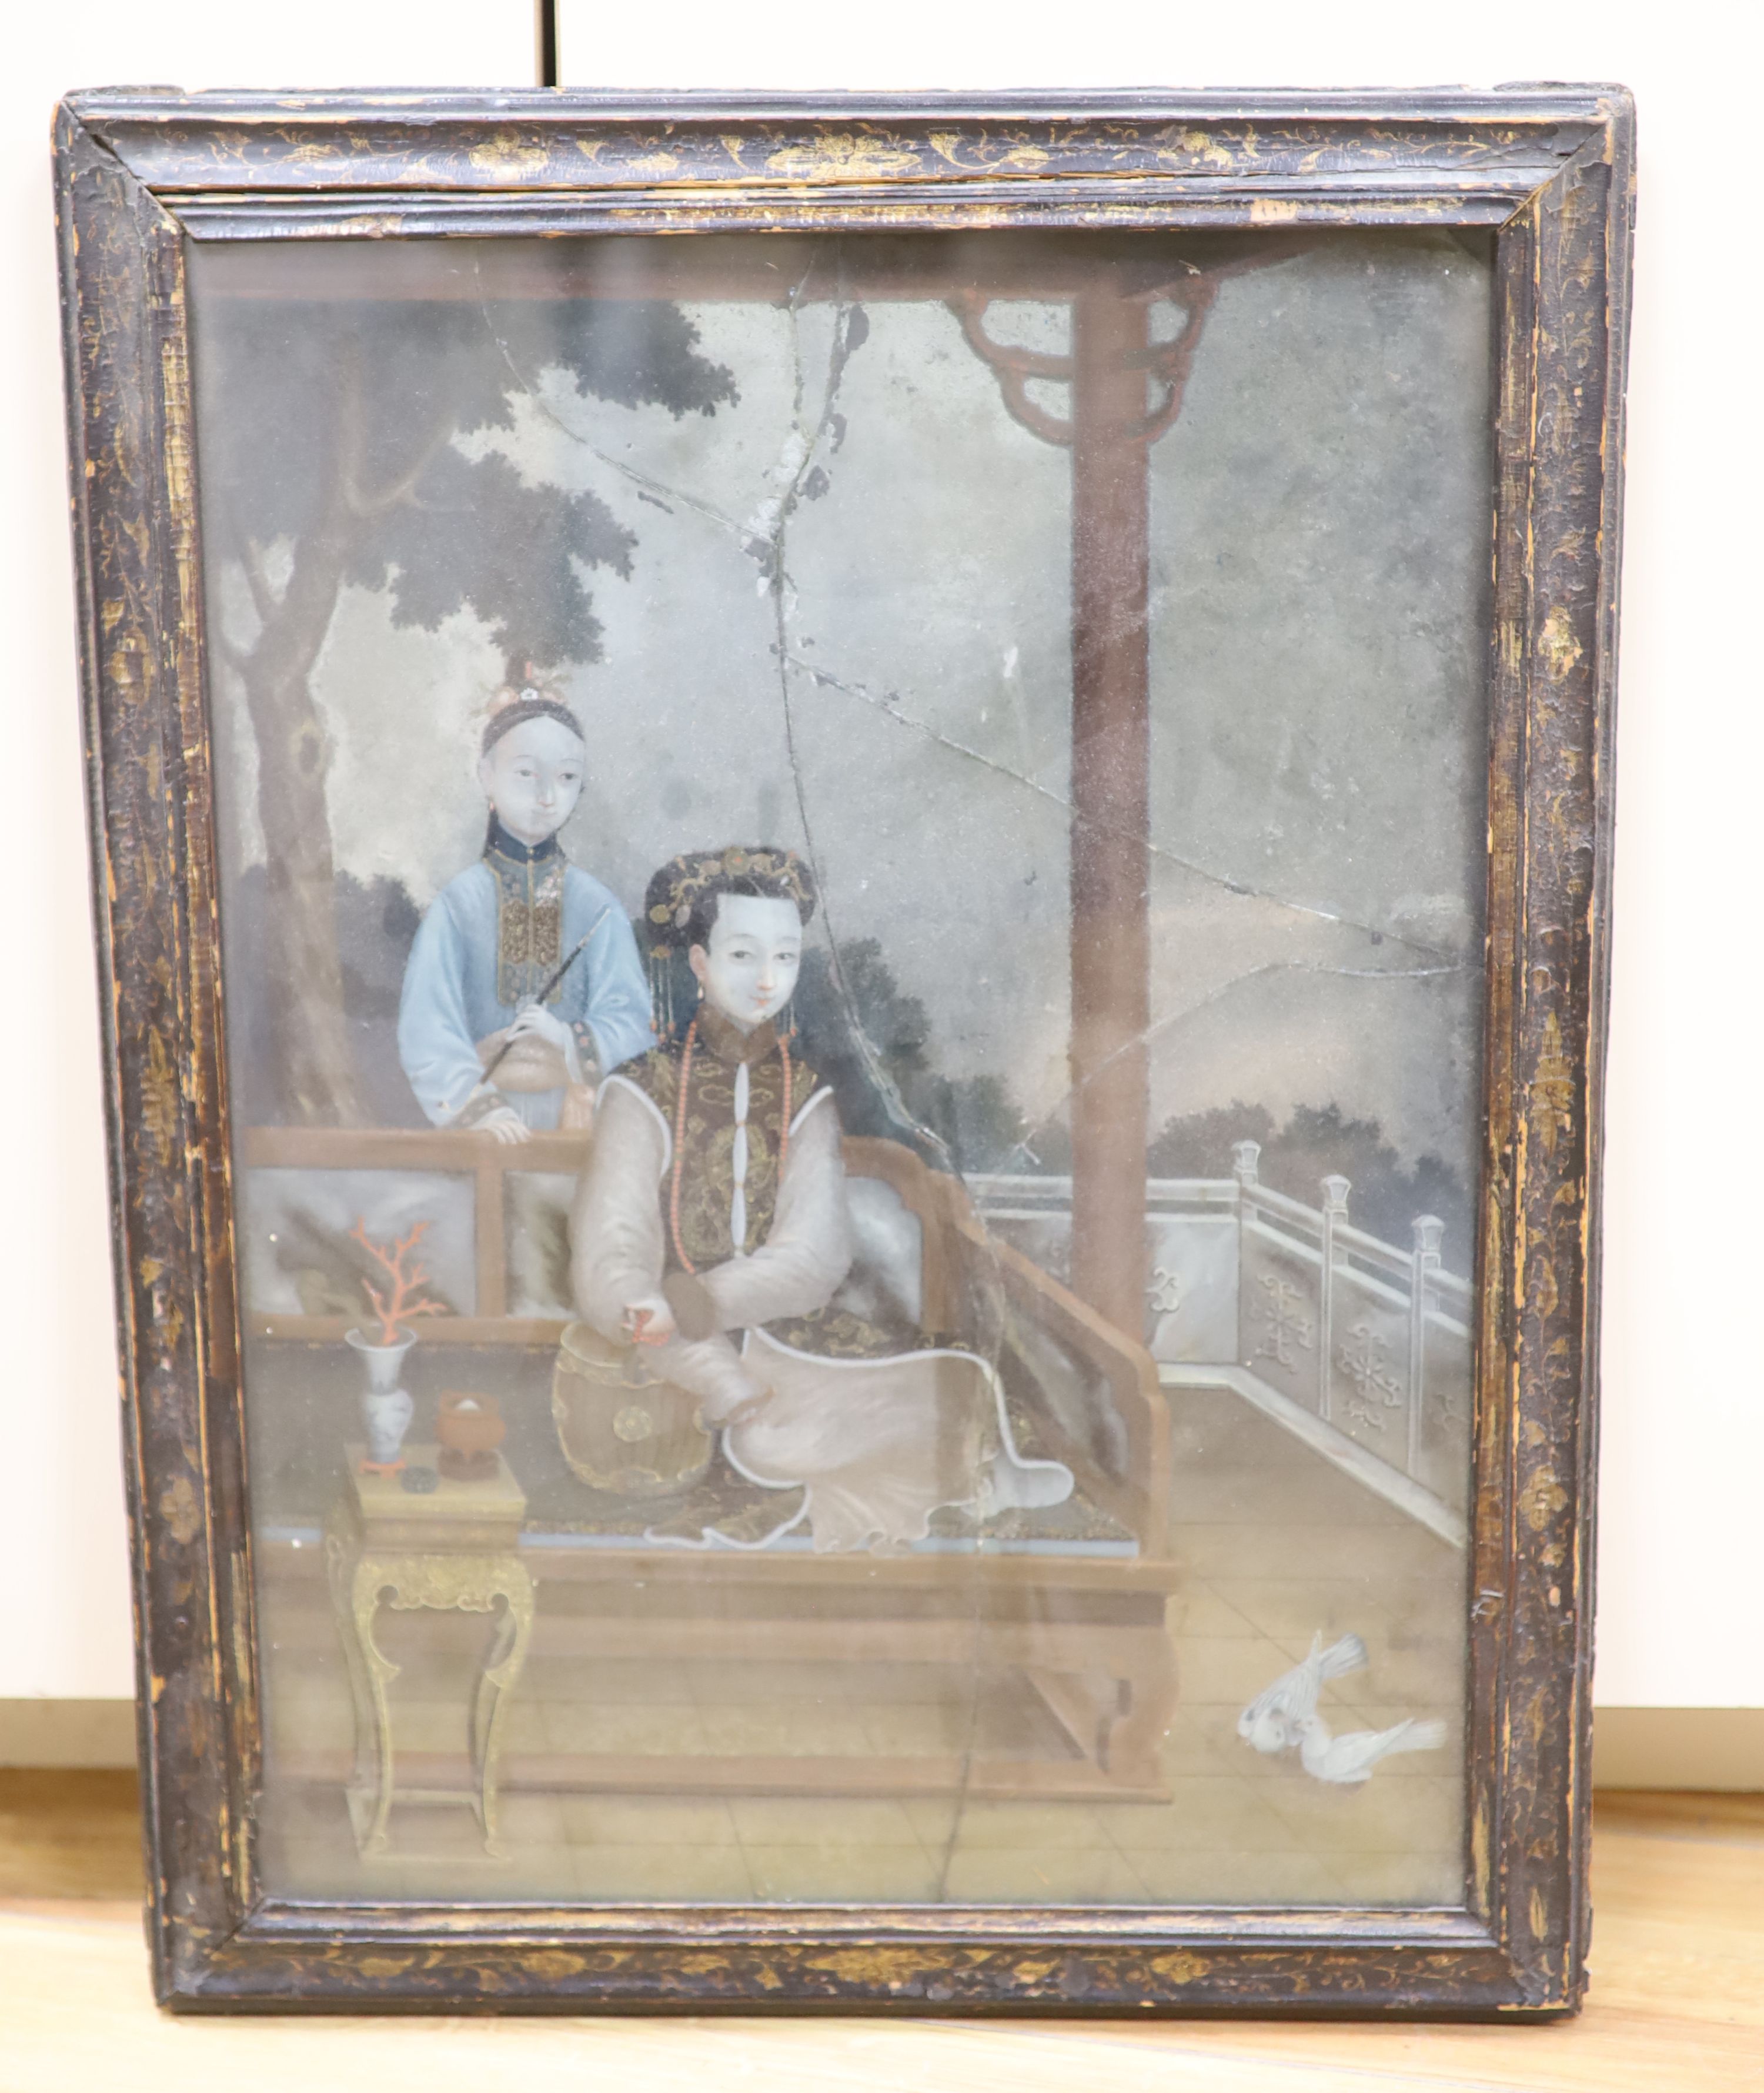 A Chinese export reverse painted mirror, 18th century, 44 x 32cm - Image 2 of 4